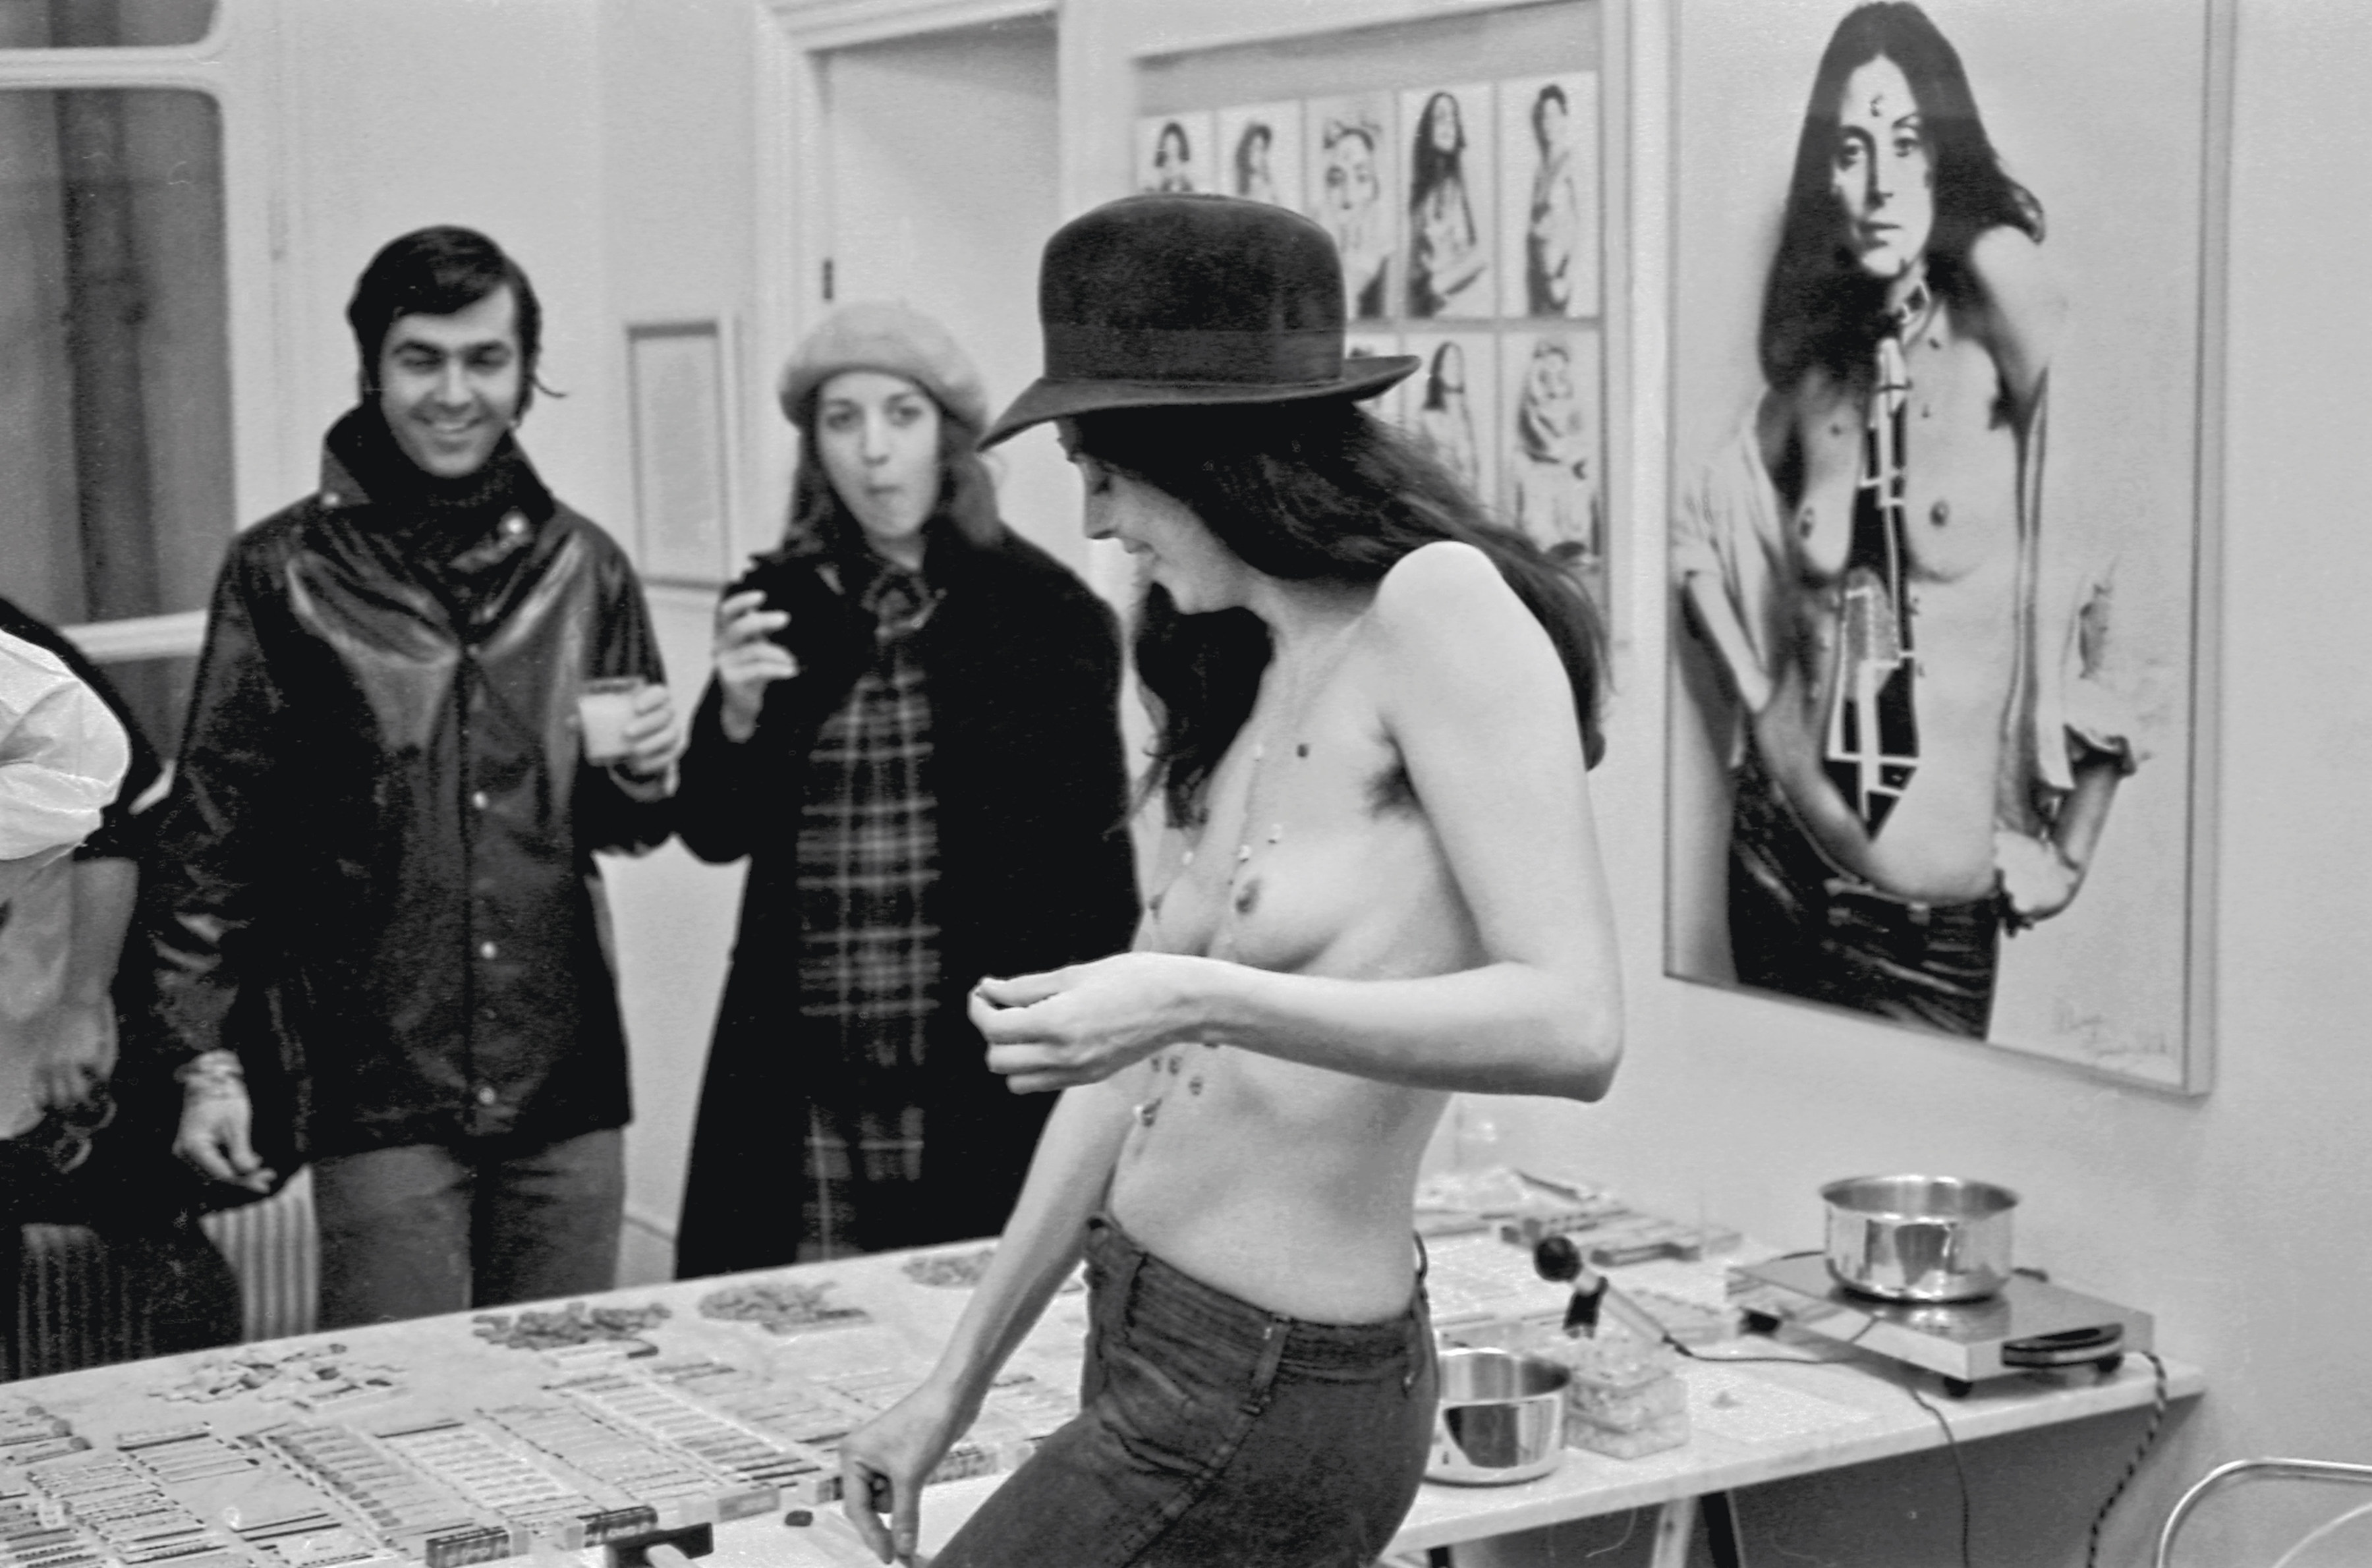 Hannah Wilke during her S.O.S. performance
at the exhibition 5 Americaines &amp;agrave; Paris,
Galerie Gerald Piltzer, Paris, 1975.
Image: Hannah Wilke Collection &amp;amp;
Archive, Los Angeles